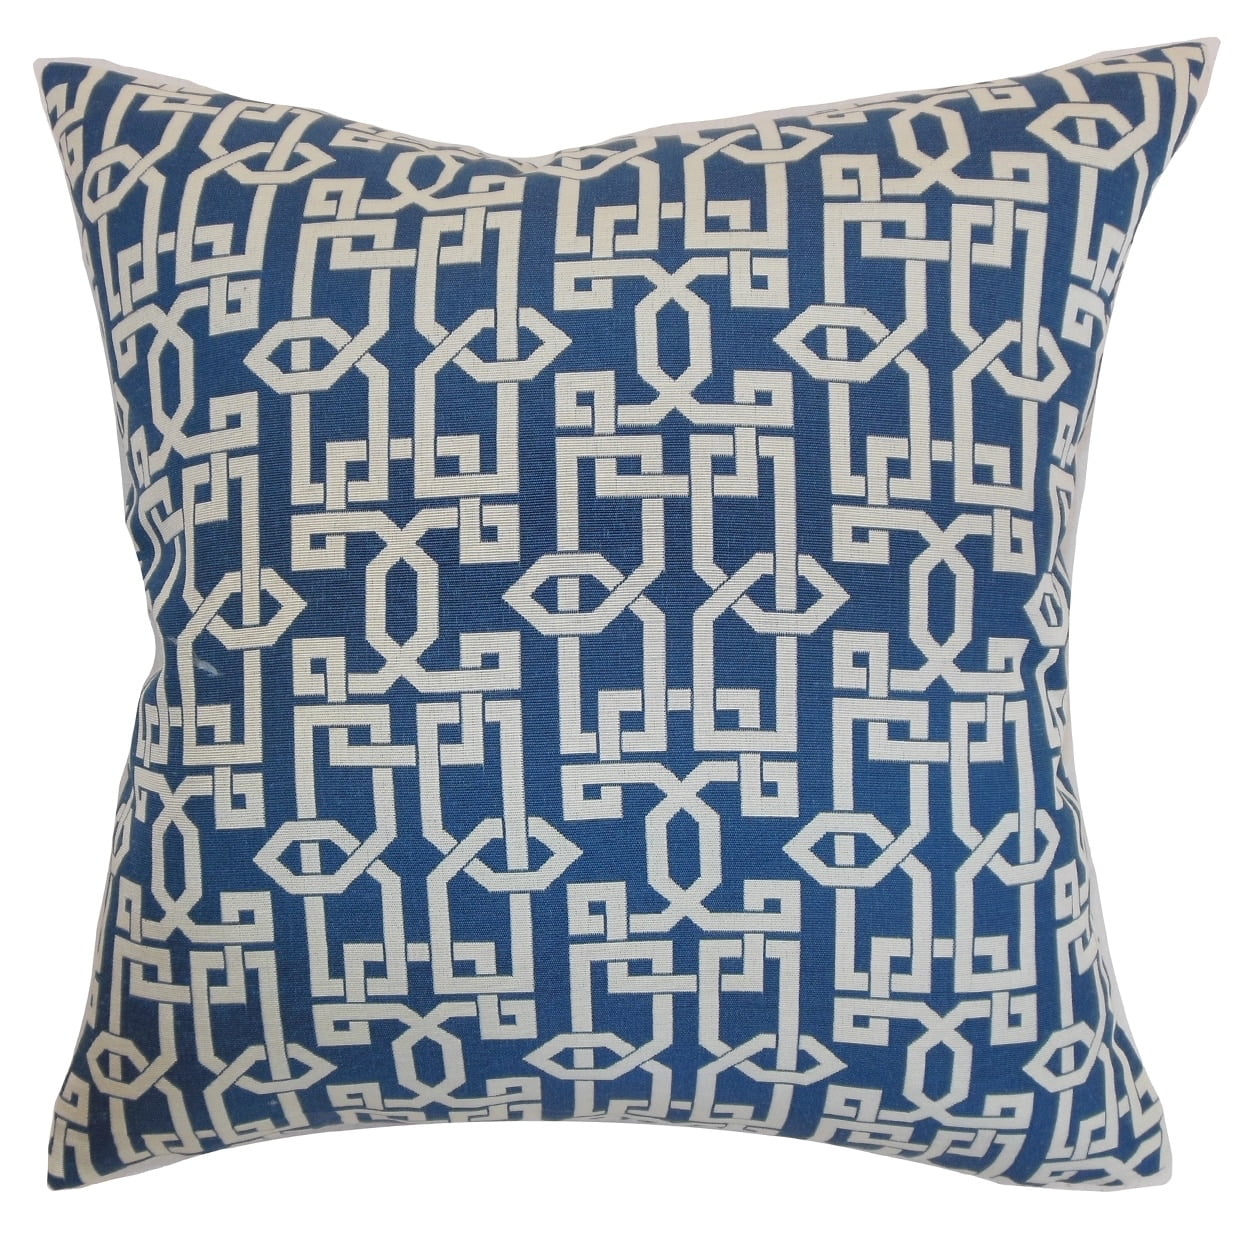 The Pillow Collection Cananea Geometric Bedding Sham Blueberry King/20 x 36 